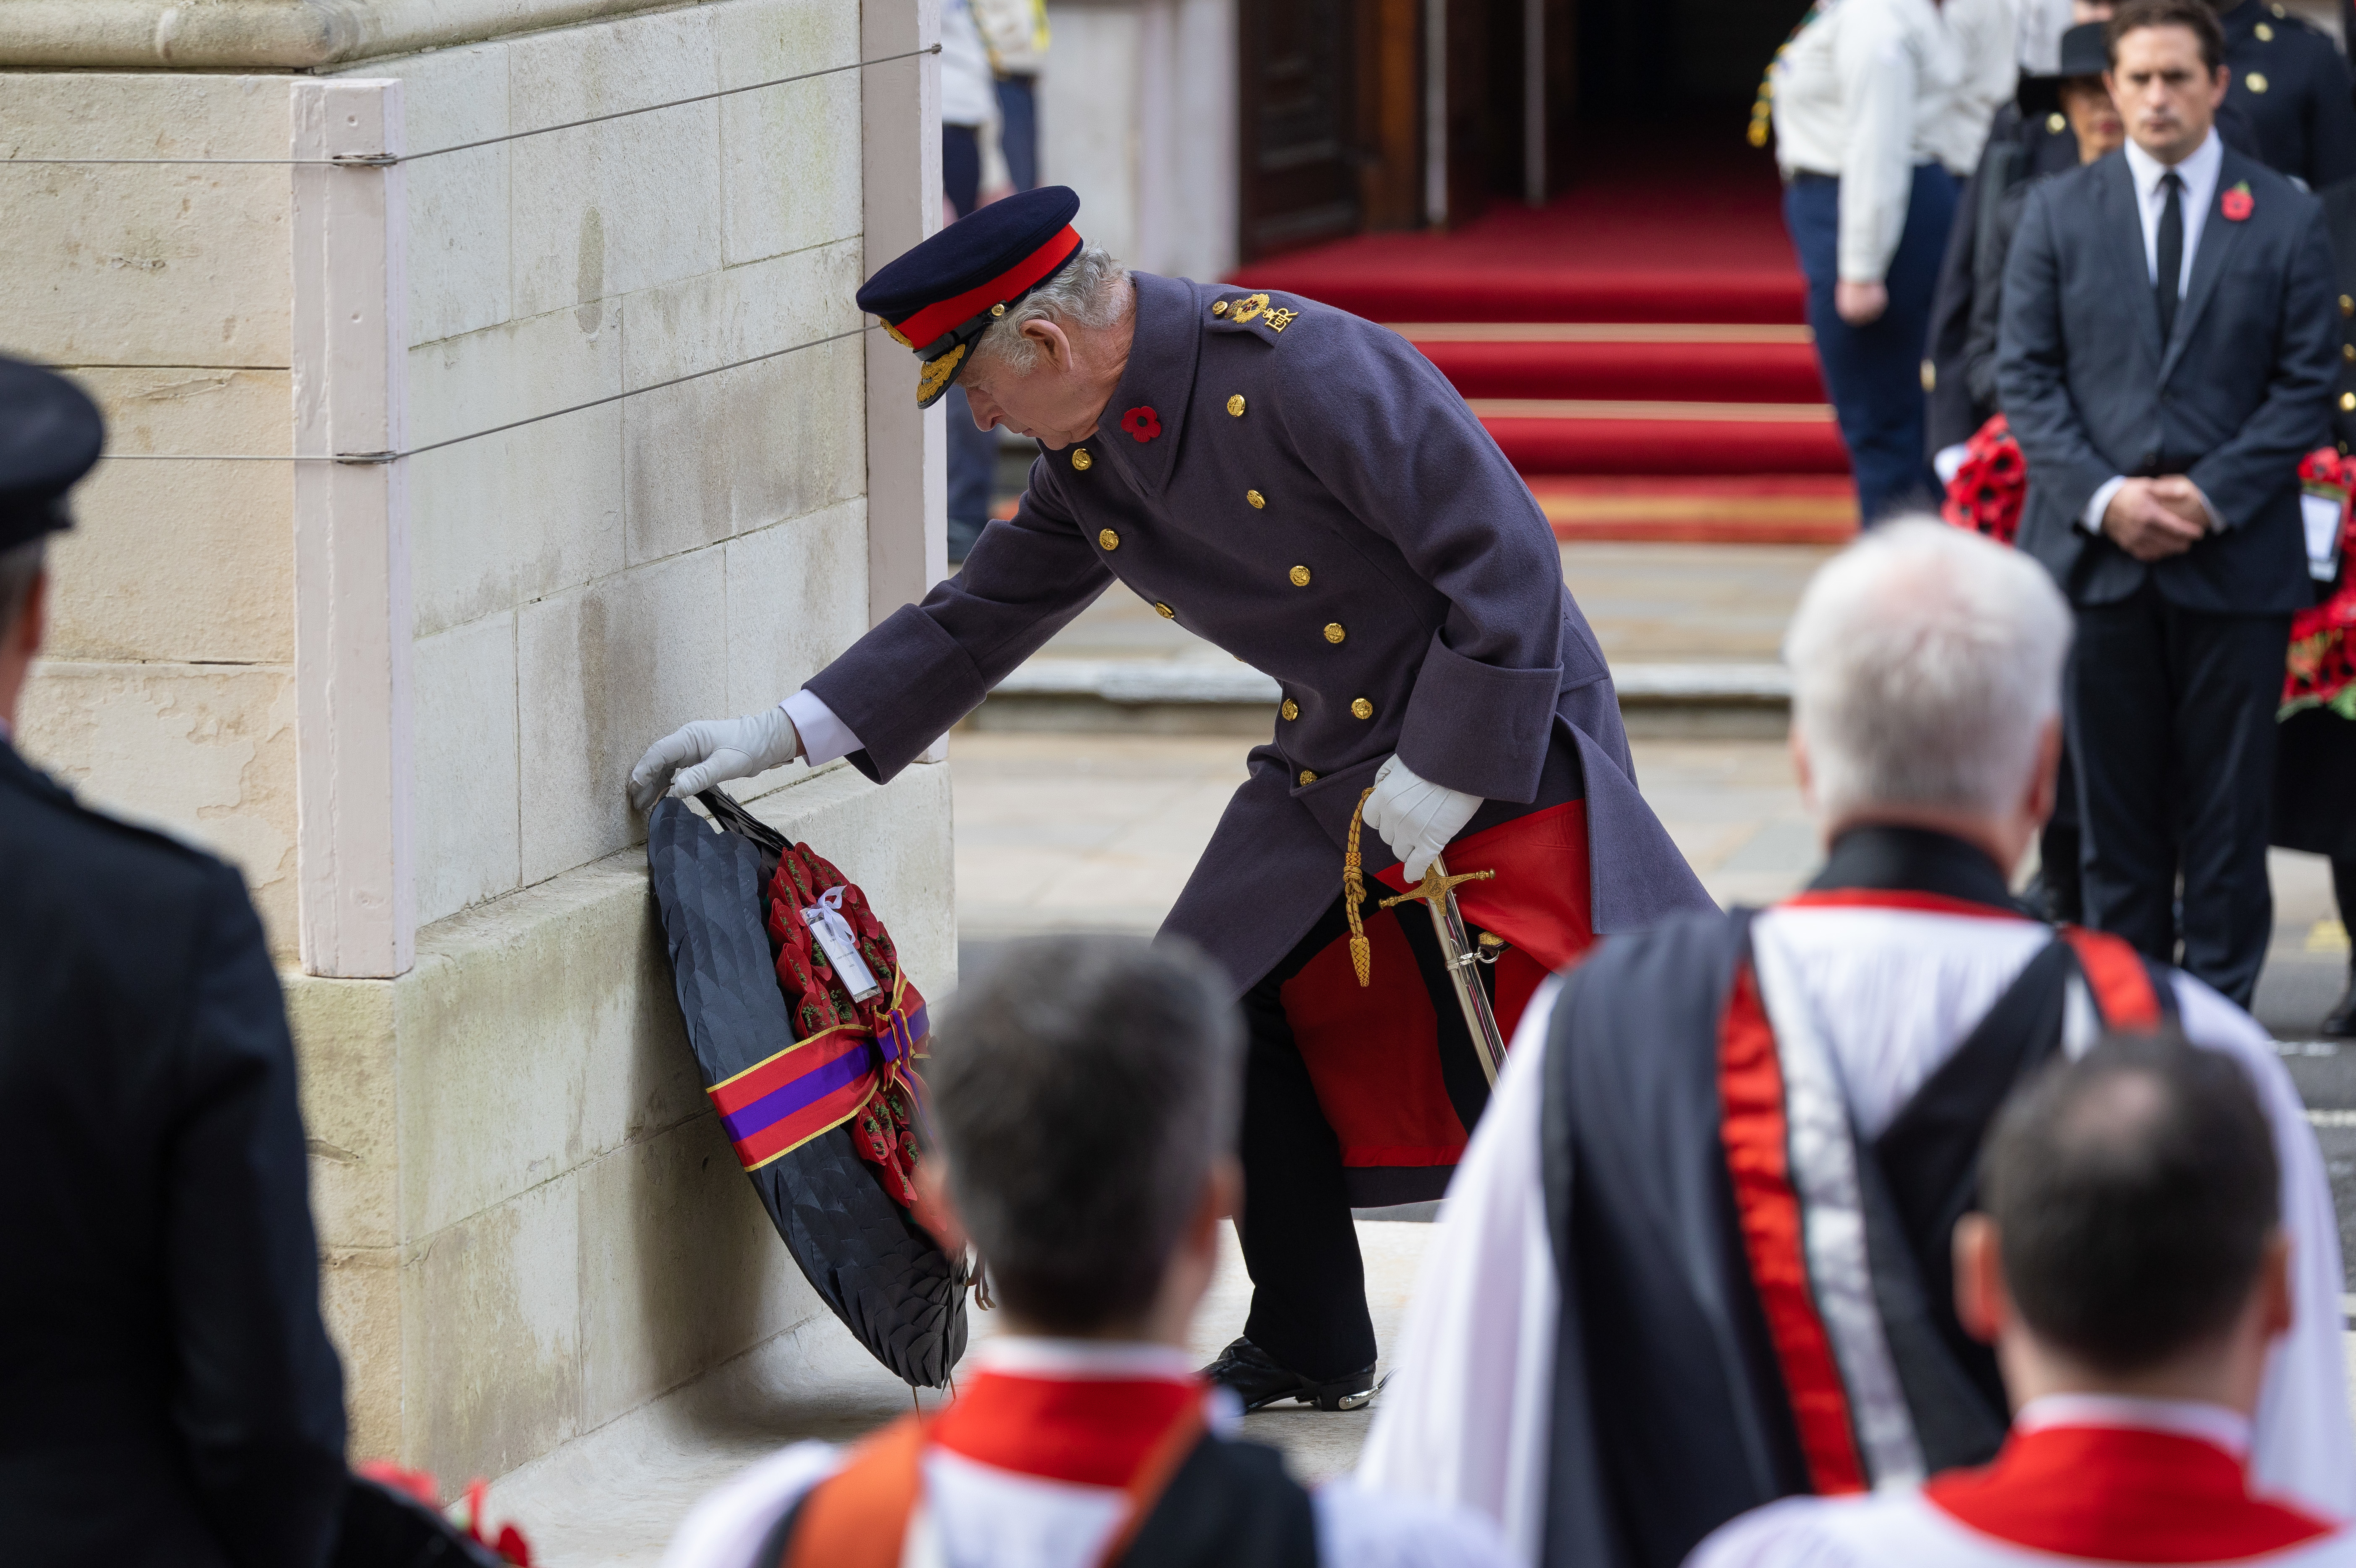 The King lays a wreath at the Cenotaph